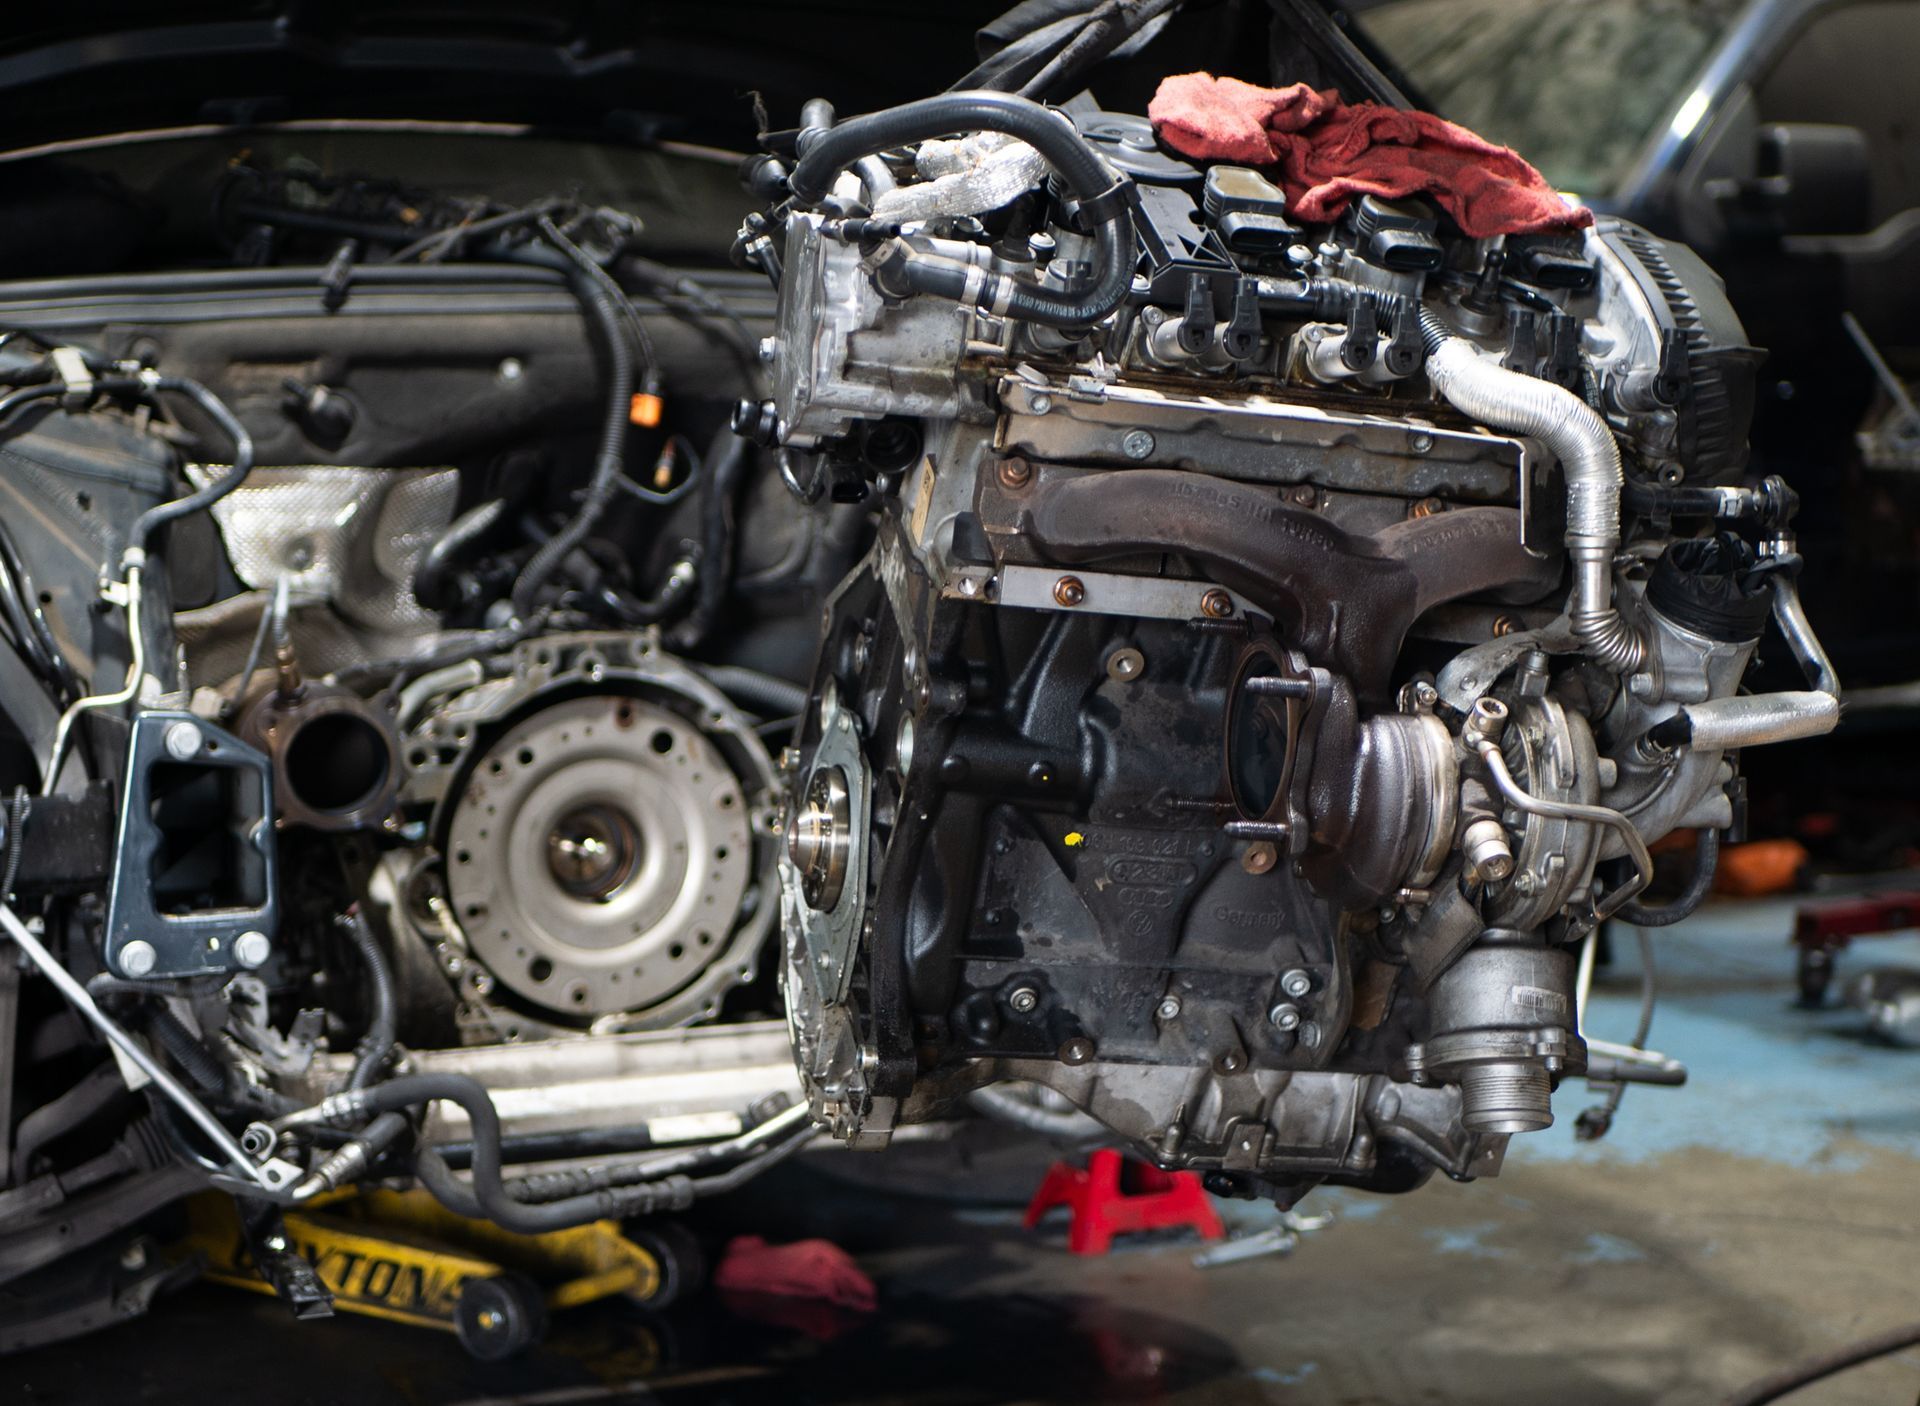 This article will give a rundown of the process to diagnose and repair Audi A4.